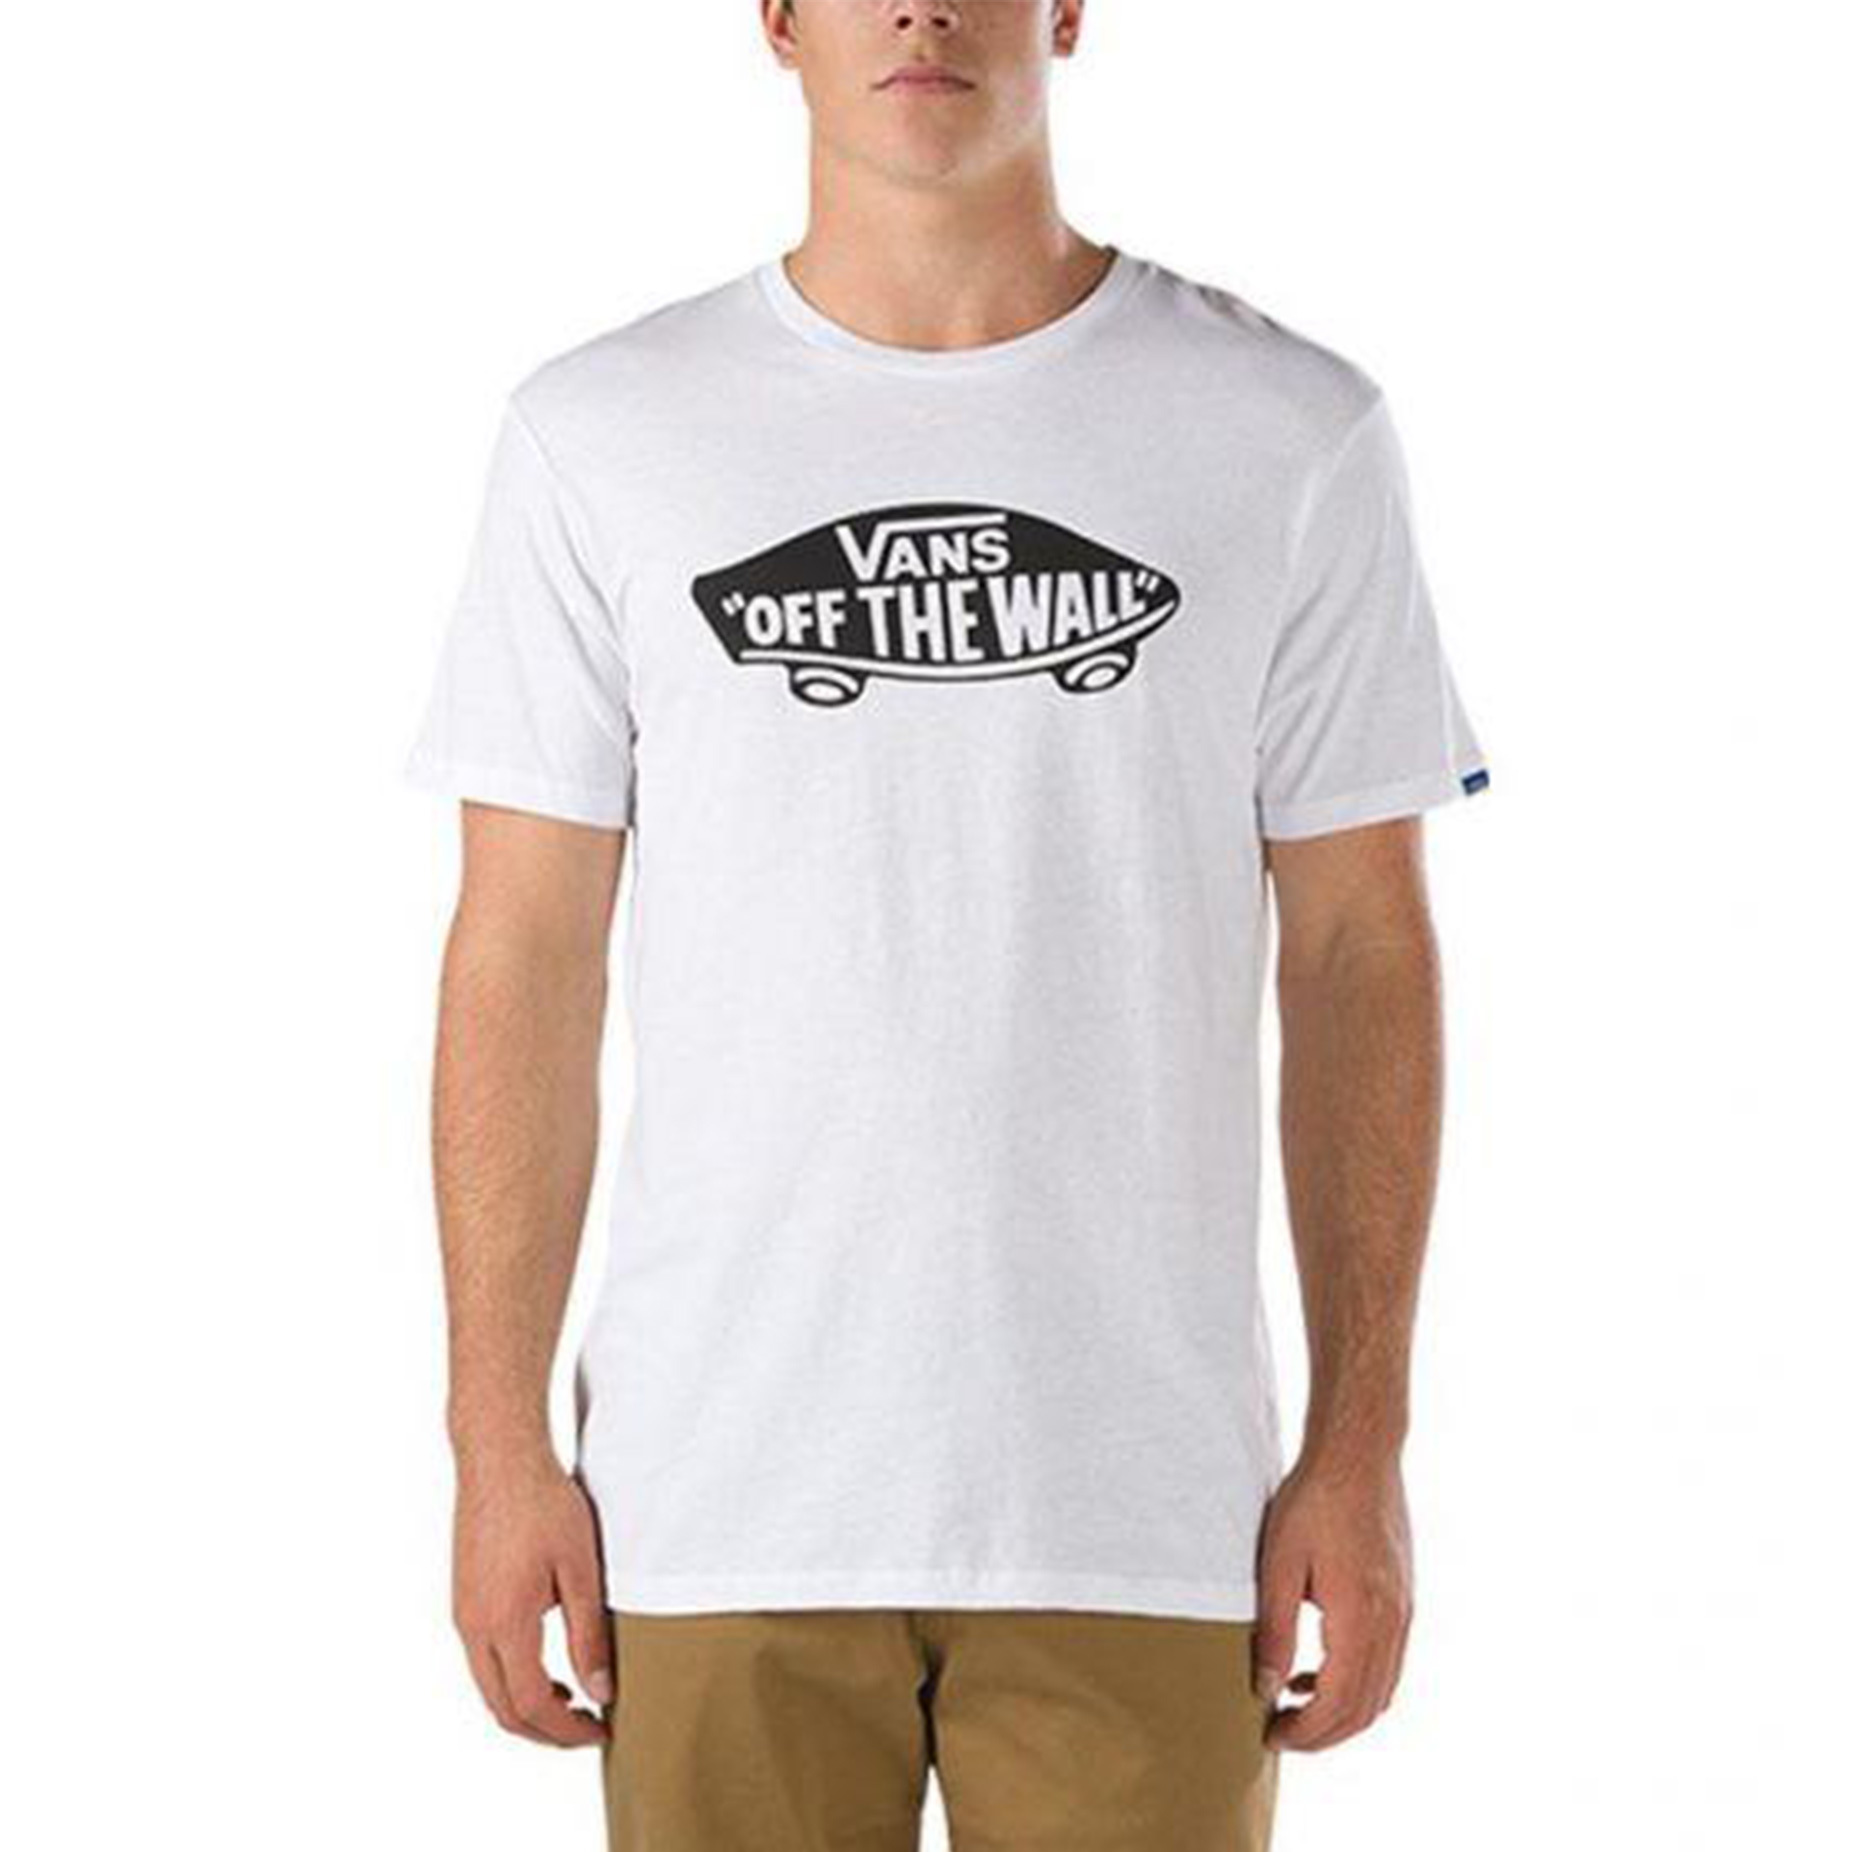 Vans Off The Wall T-Shirt - White 